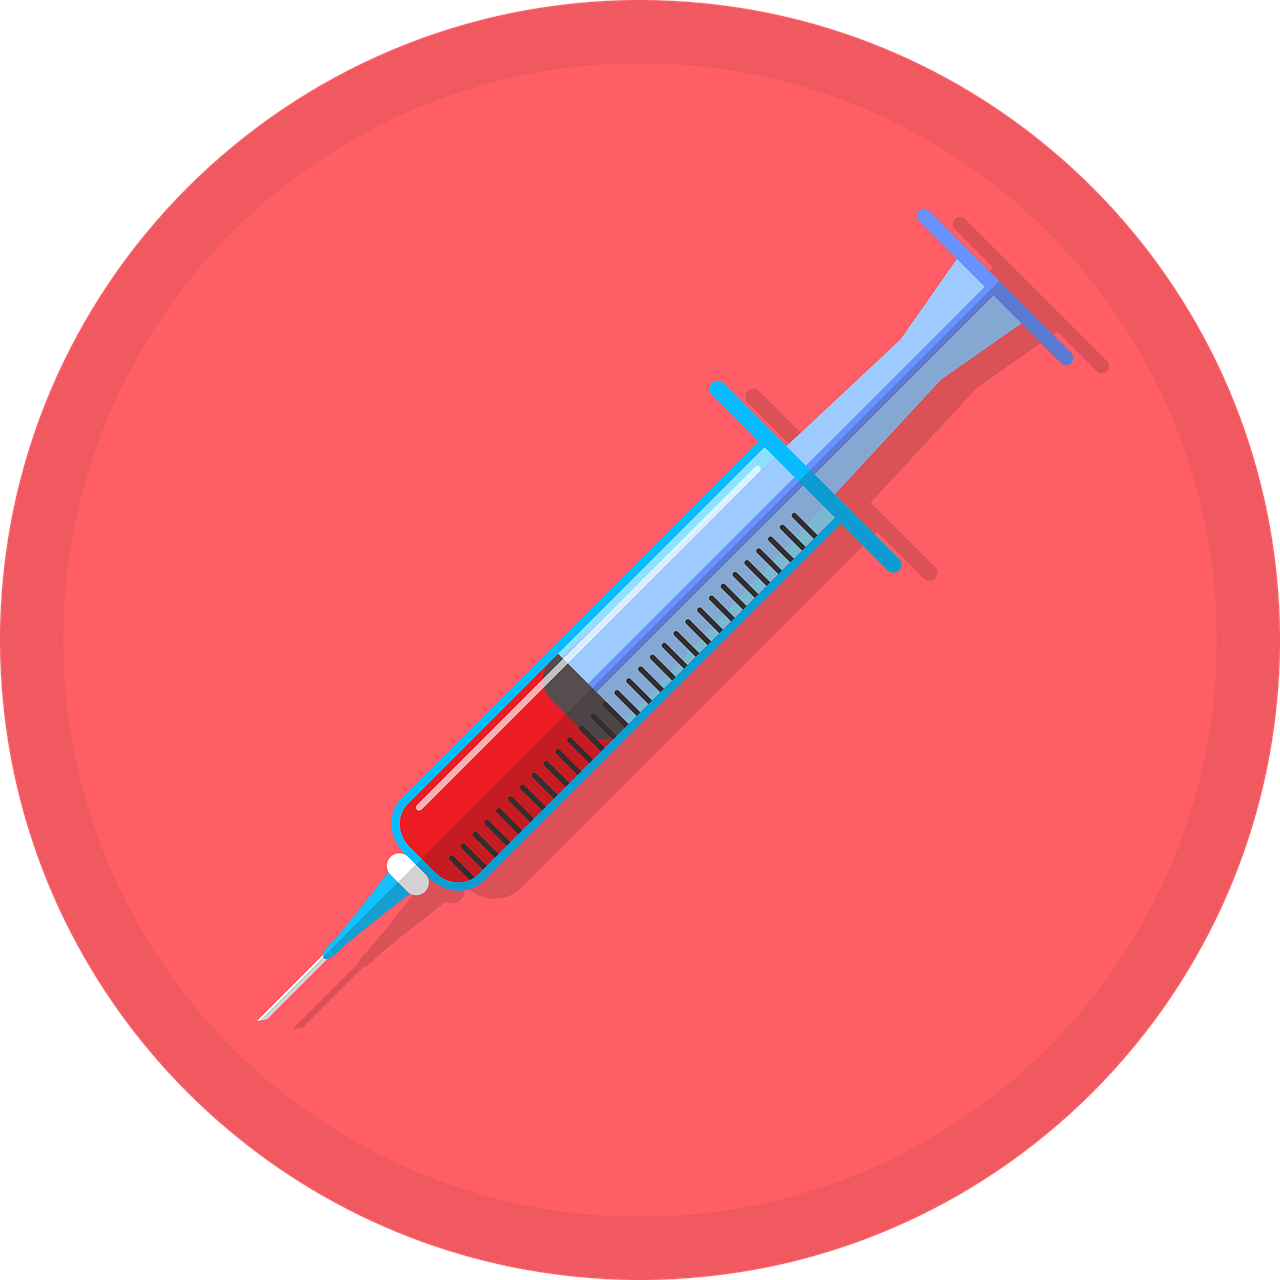 a syll in a red circle on a black background, vector art, shutterstock, syringes, 3 d icon for mobile game, colorful medical equipment, on a red background